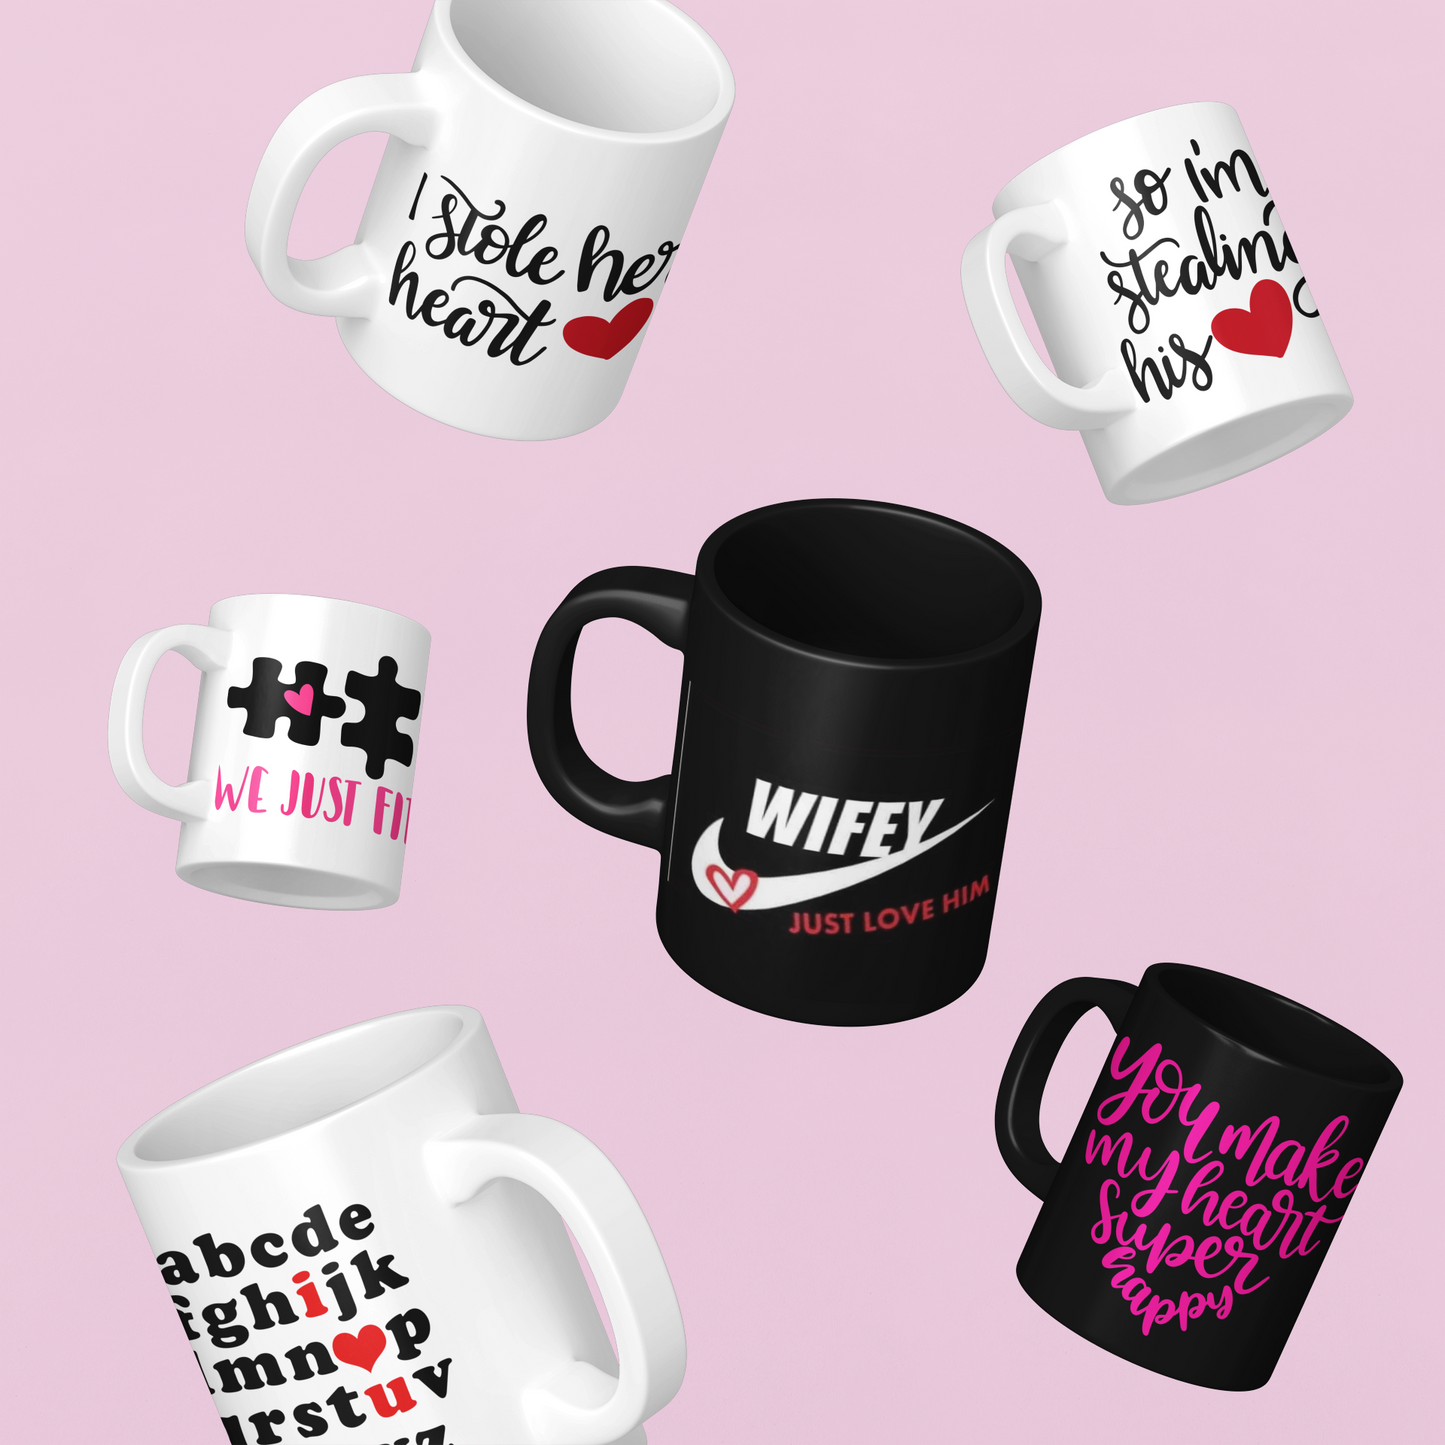 A variety of Mugs with the following sayings "I stole her heart", "We just fit", So I'm stealing his Heart", "Wifey, We just love him", "You make my heart Happy"